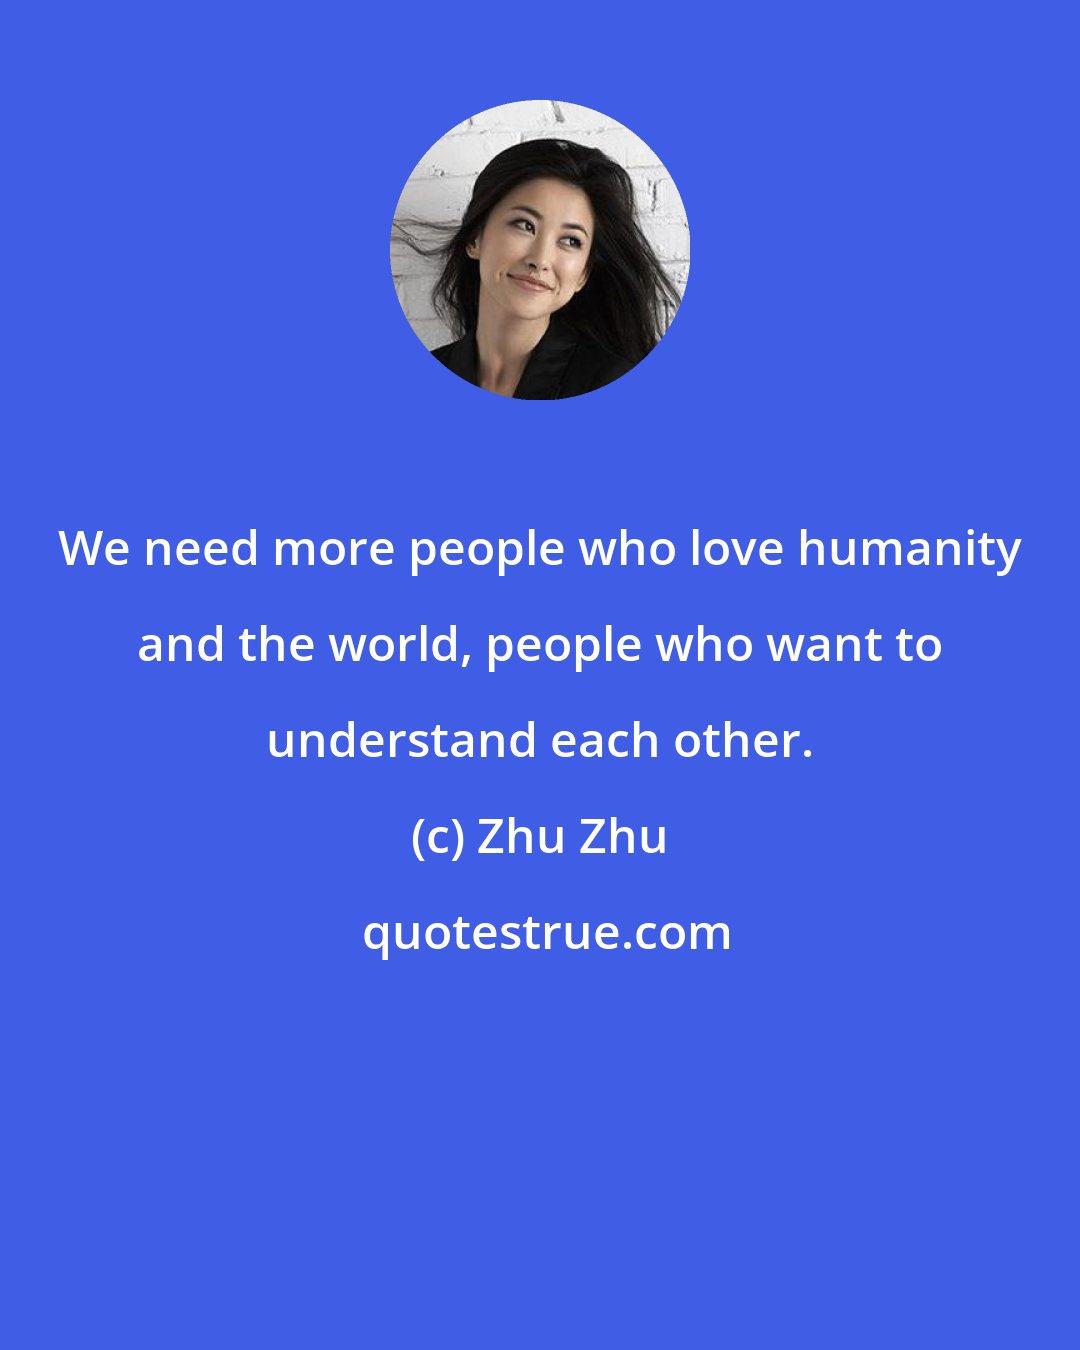 Zhu Zhu: We need more people who love humanity and the world, people who want to understand each other.